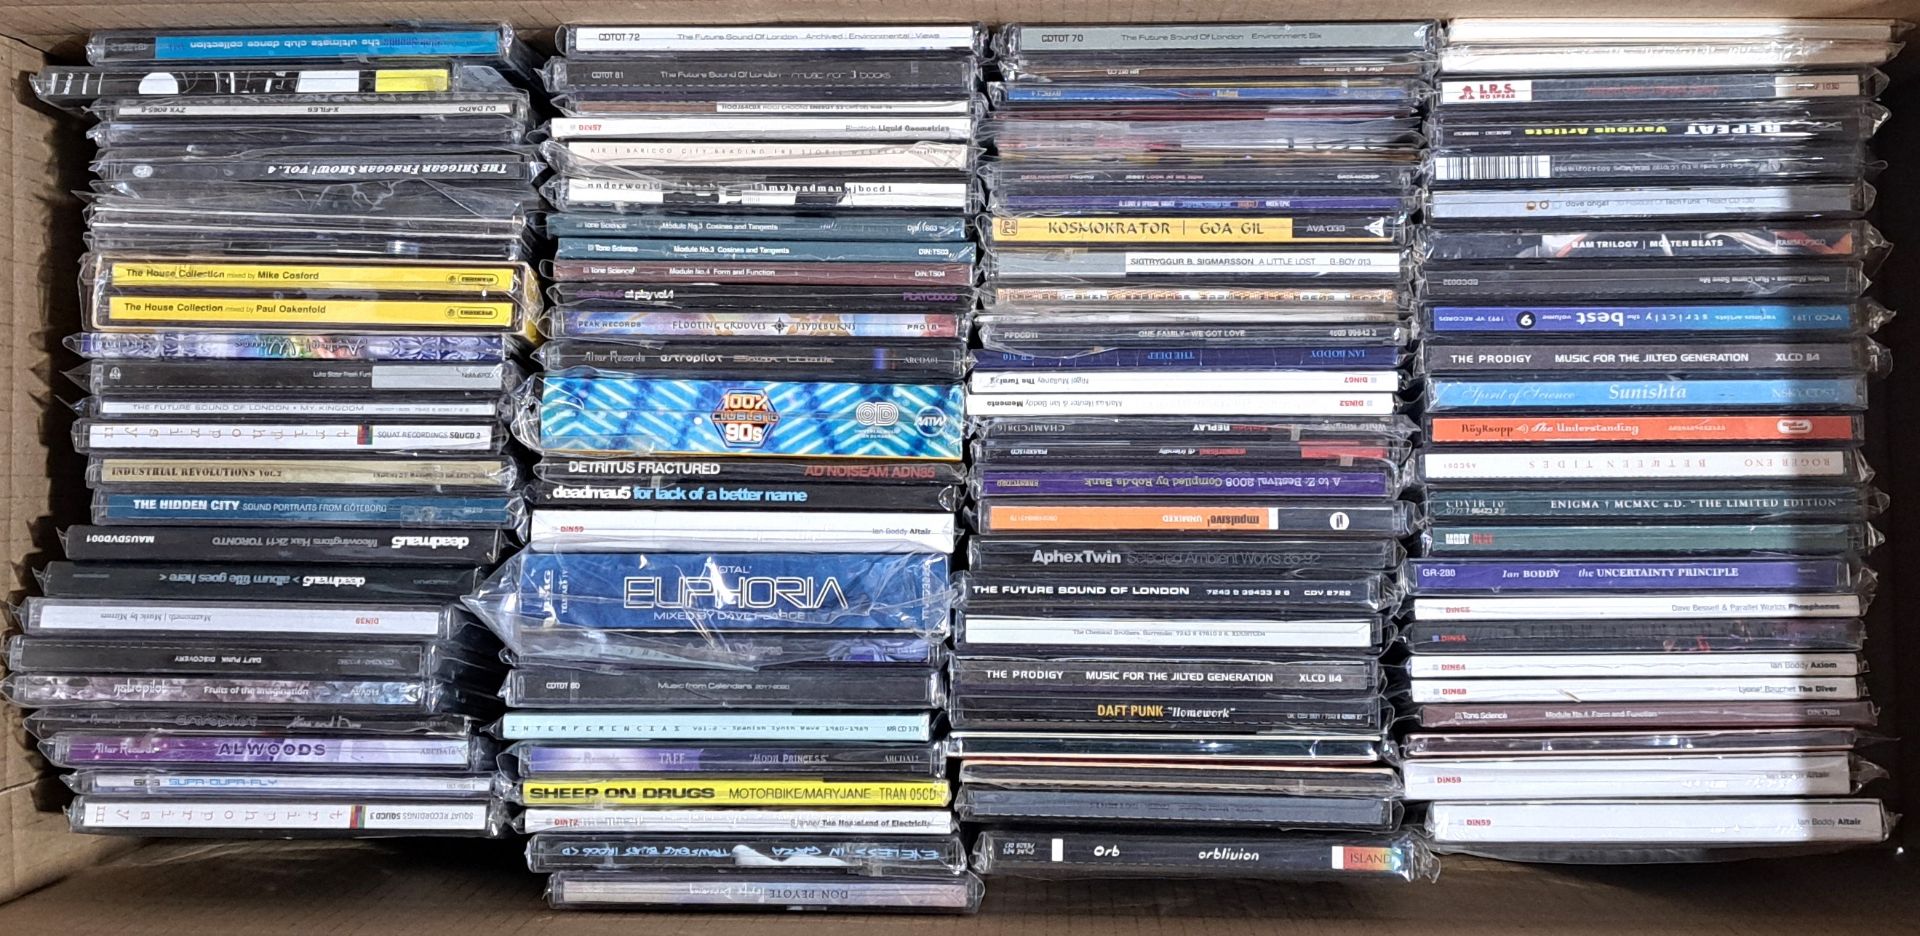 Dance, Electronic and similar, a group of CDs